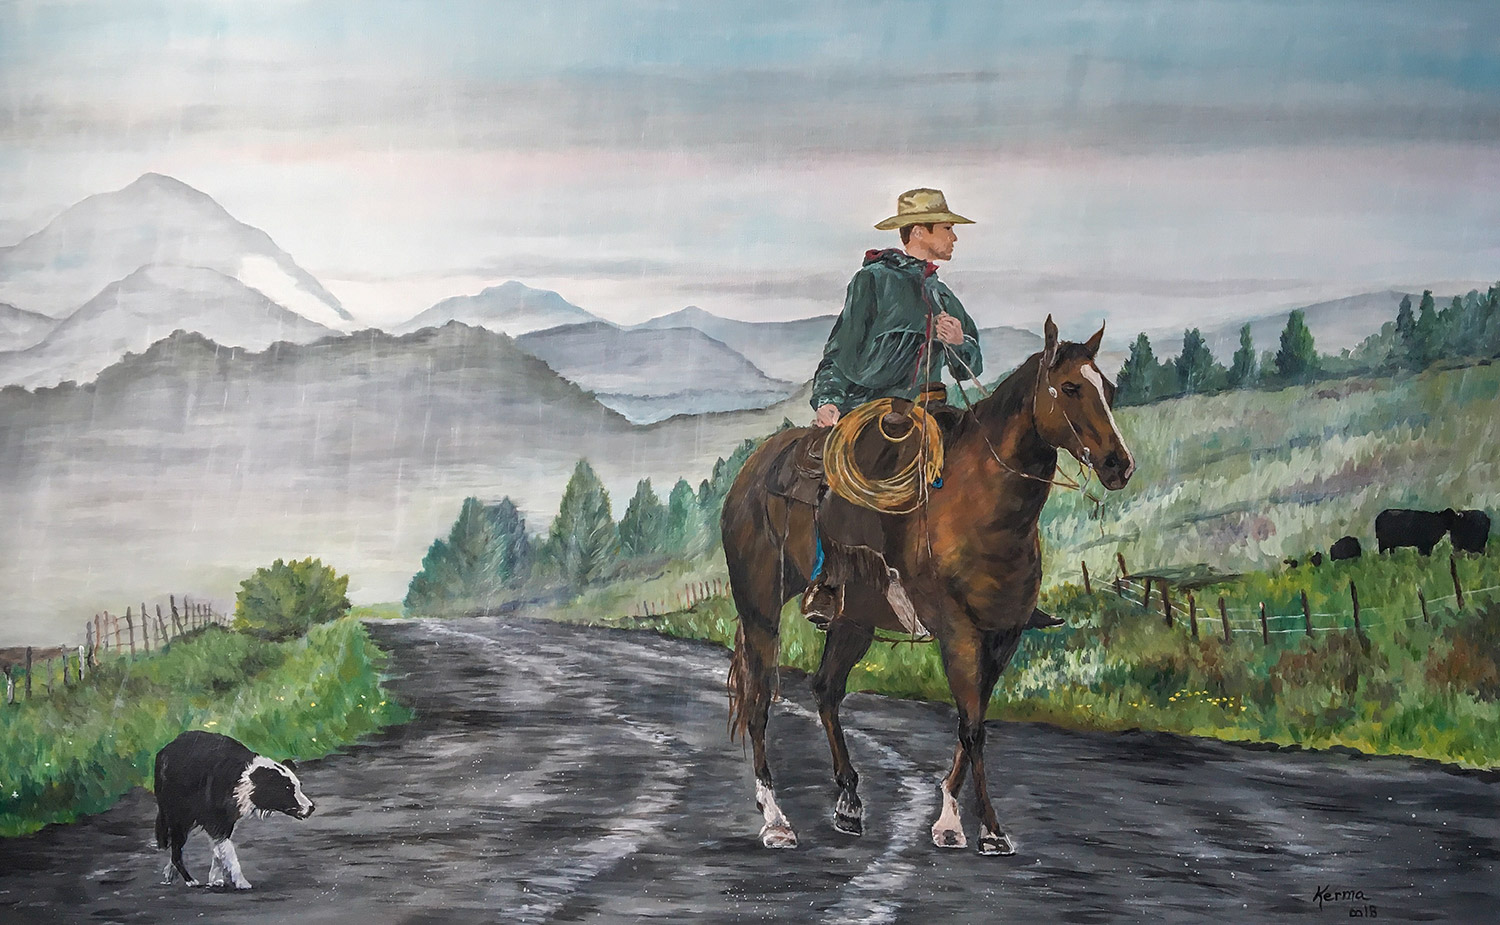 An acrylic painting by Kerma Boyum-Sarmiento of my cowboy photograph called "Braving the Rain."